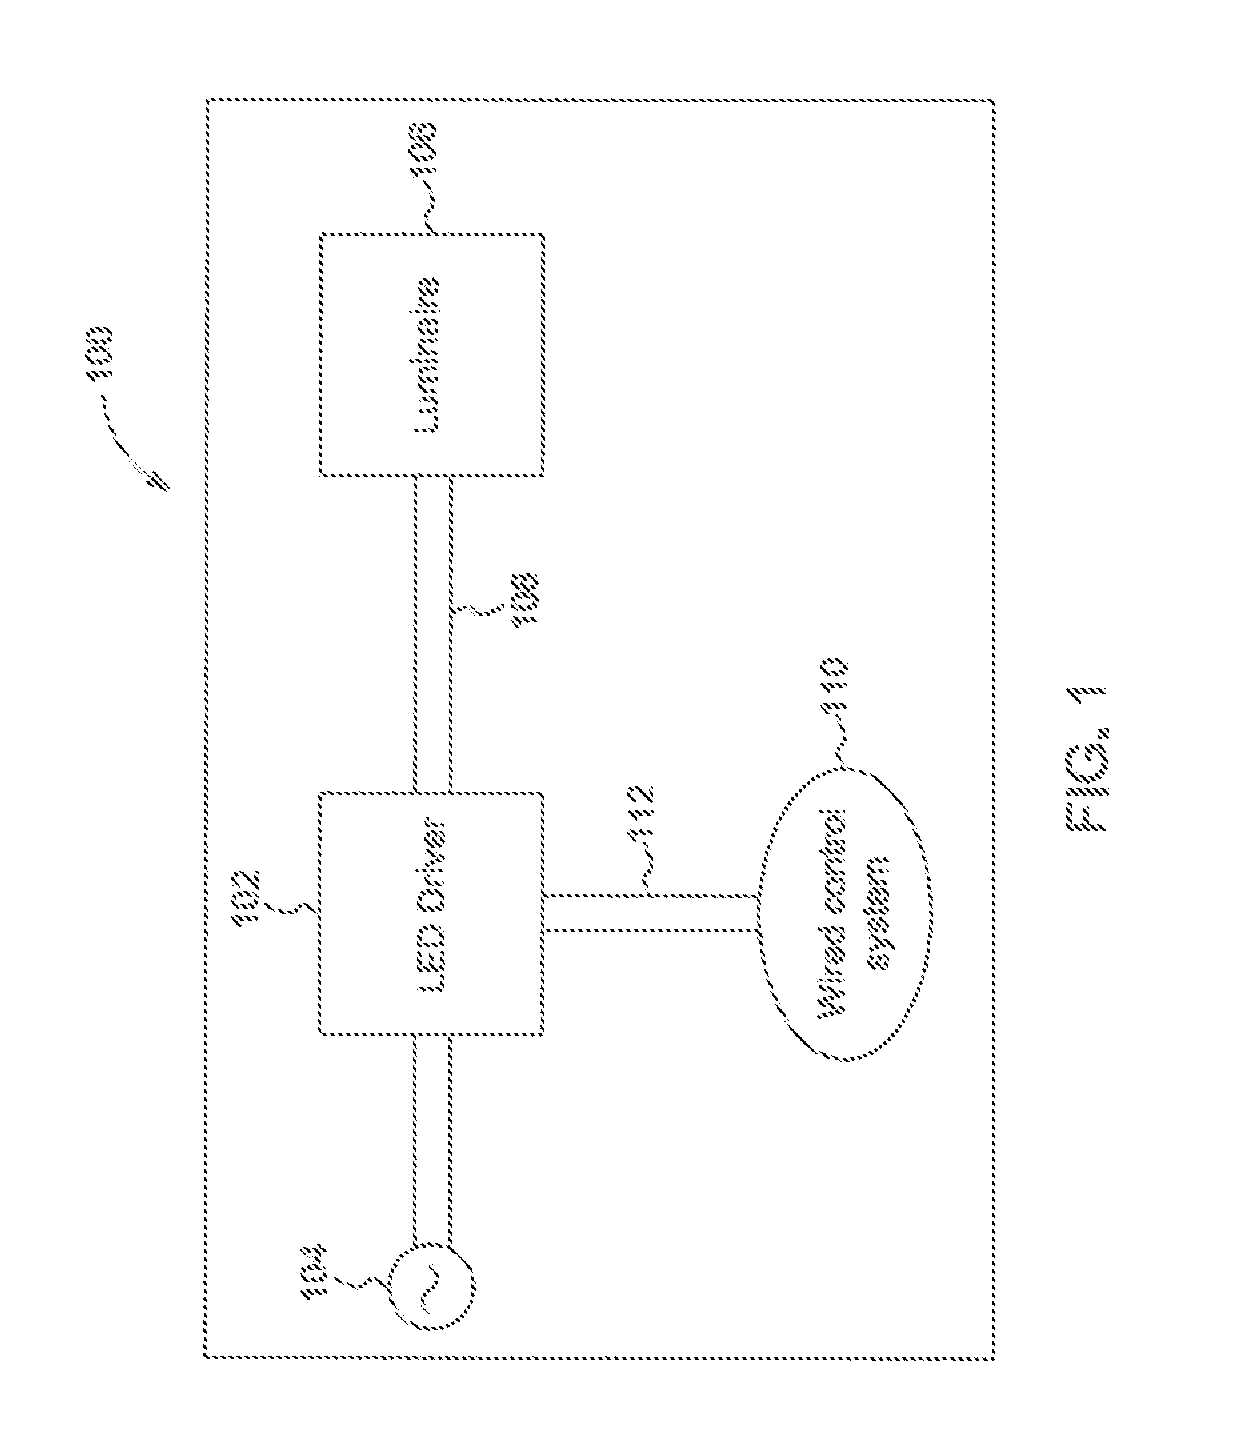 Digital control method for low output dimming of light emitting diode (LED) drivers